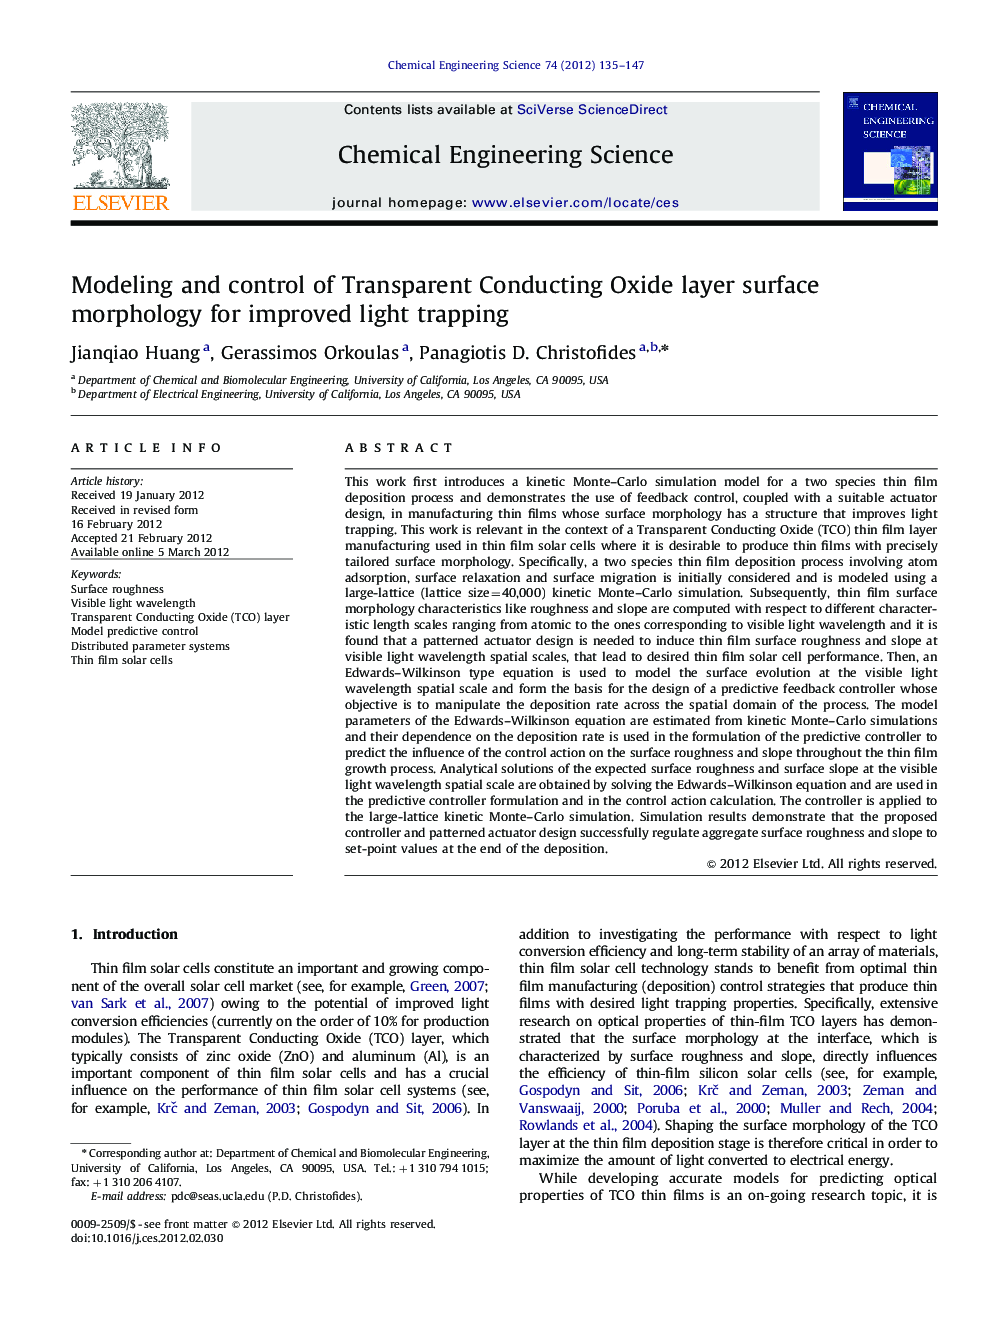 Modeling and control of Transparent Conducting Oxide layer surface morphology for improved light trapping